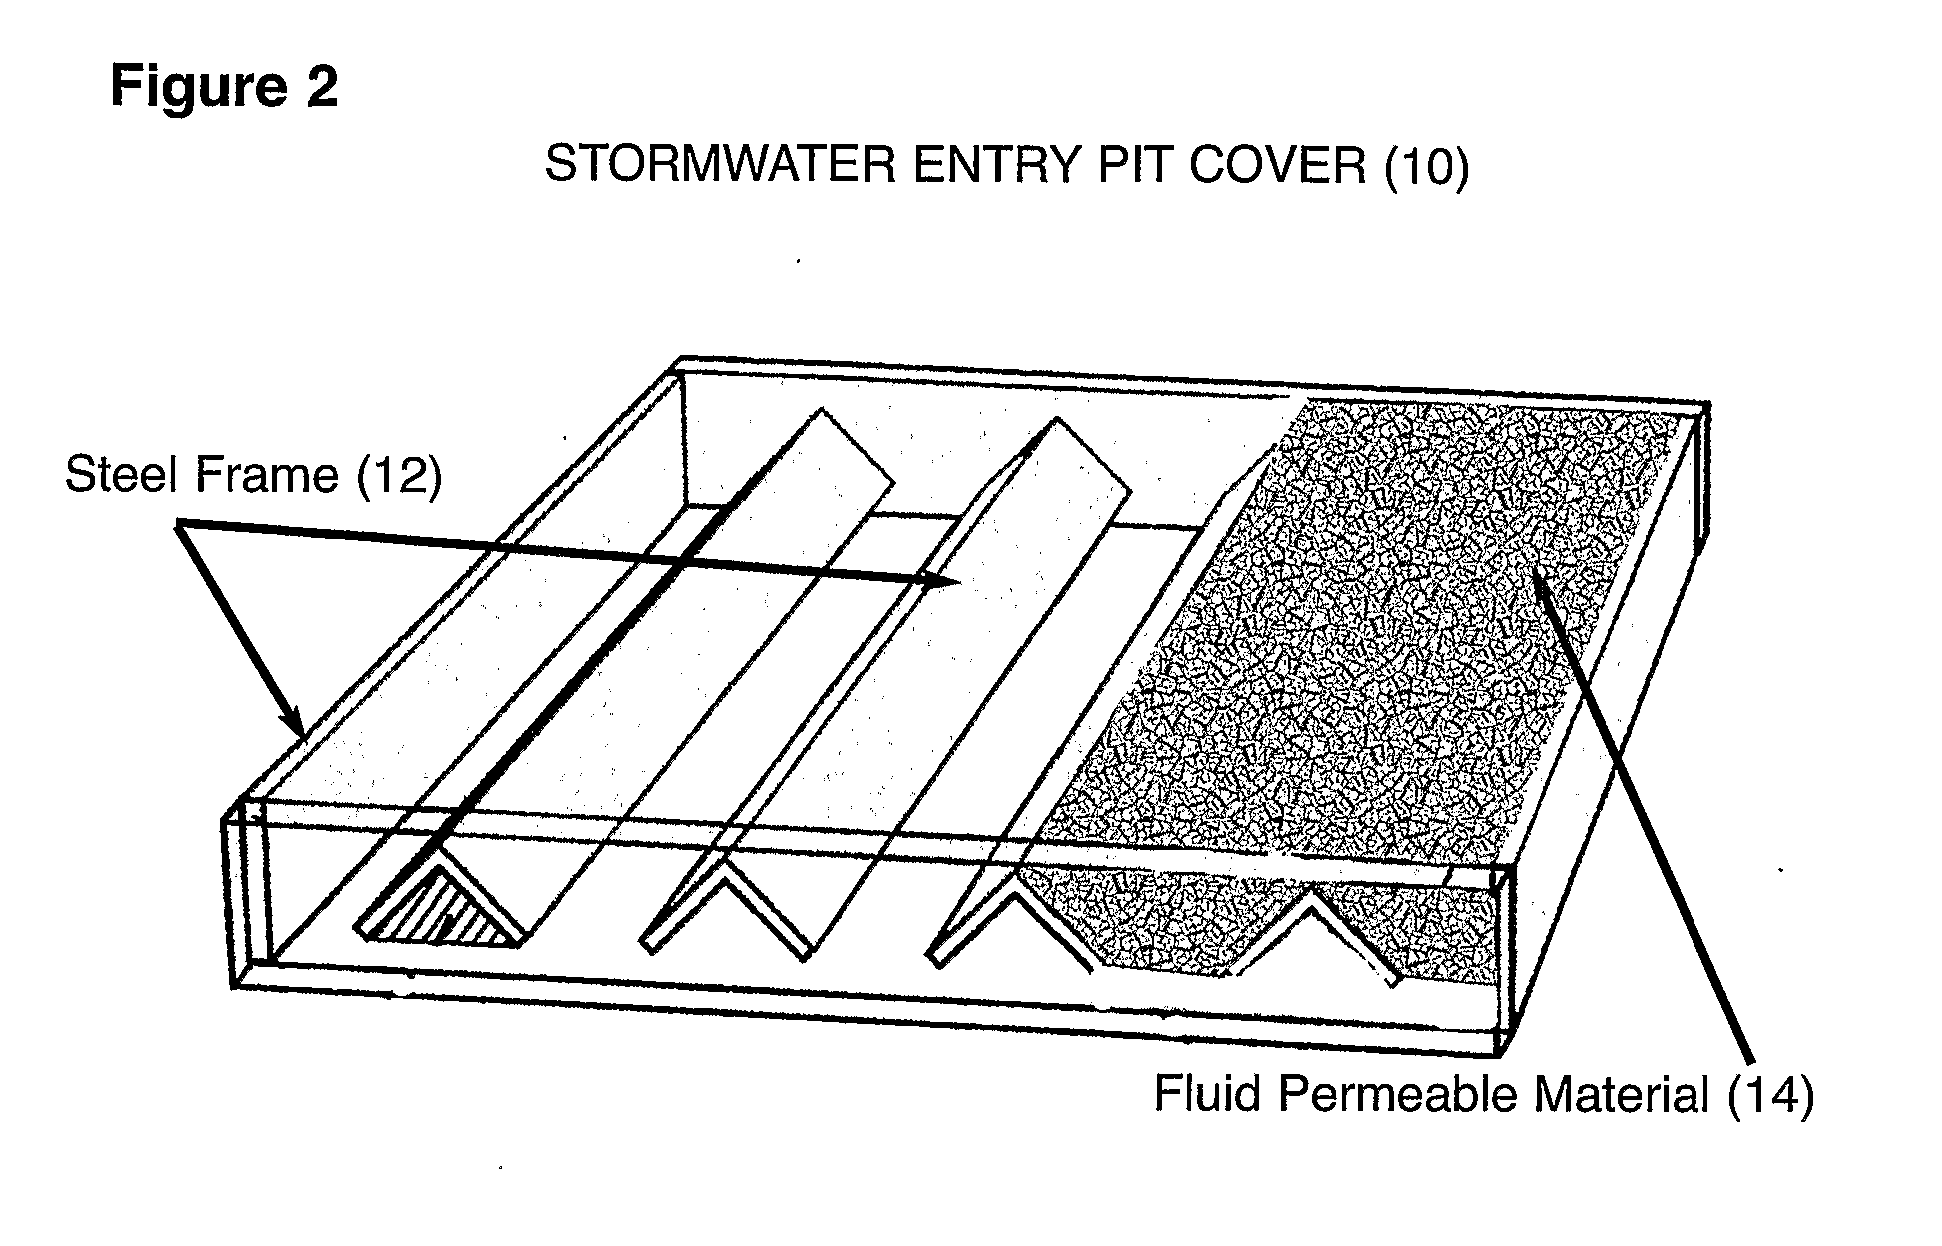 Fluid Permeable Composite Material and Process for Same